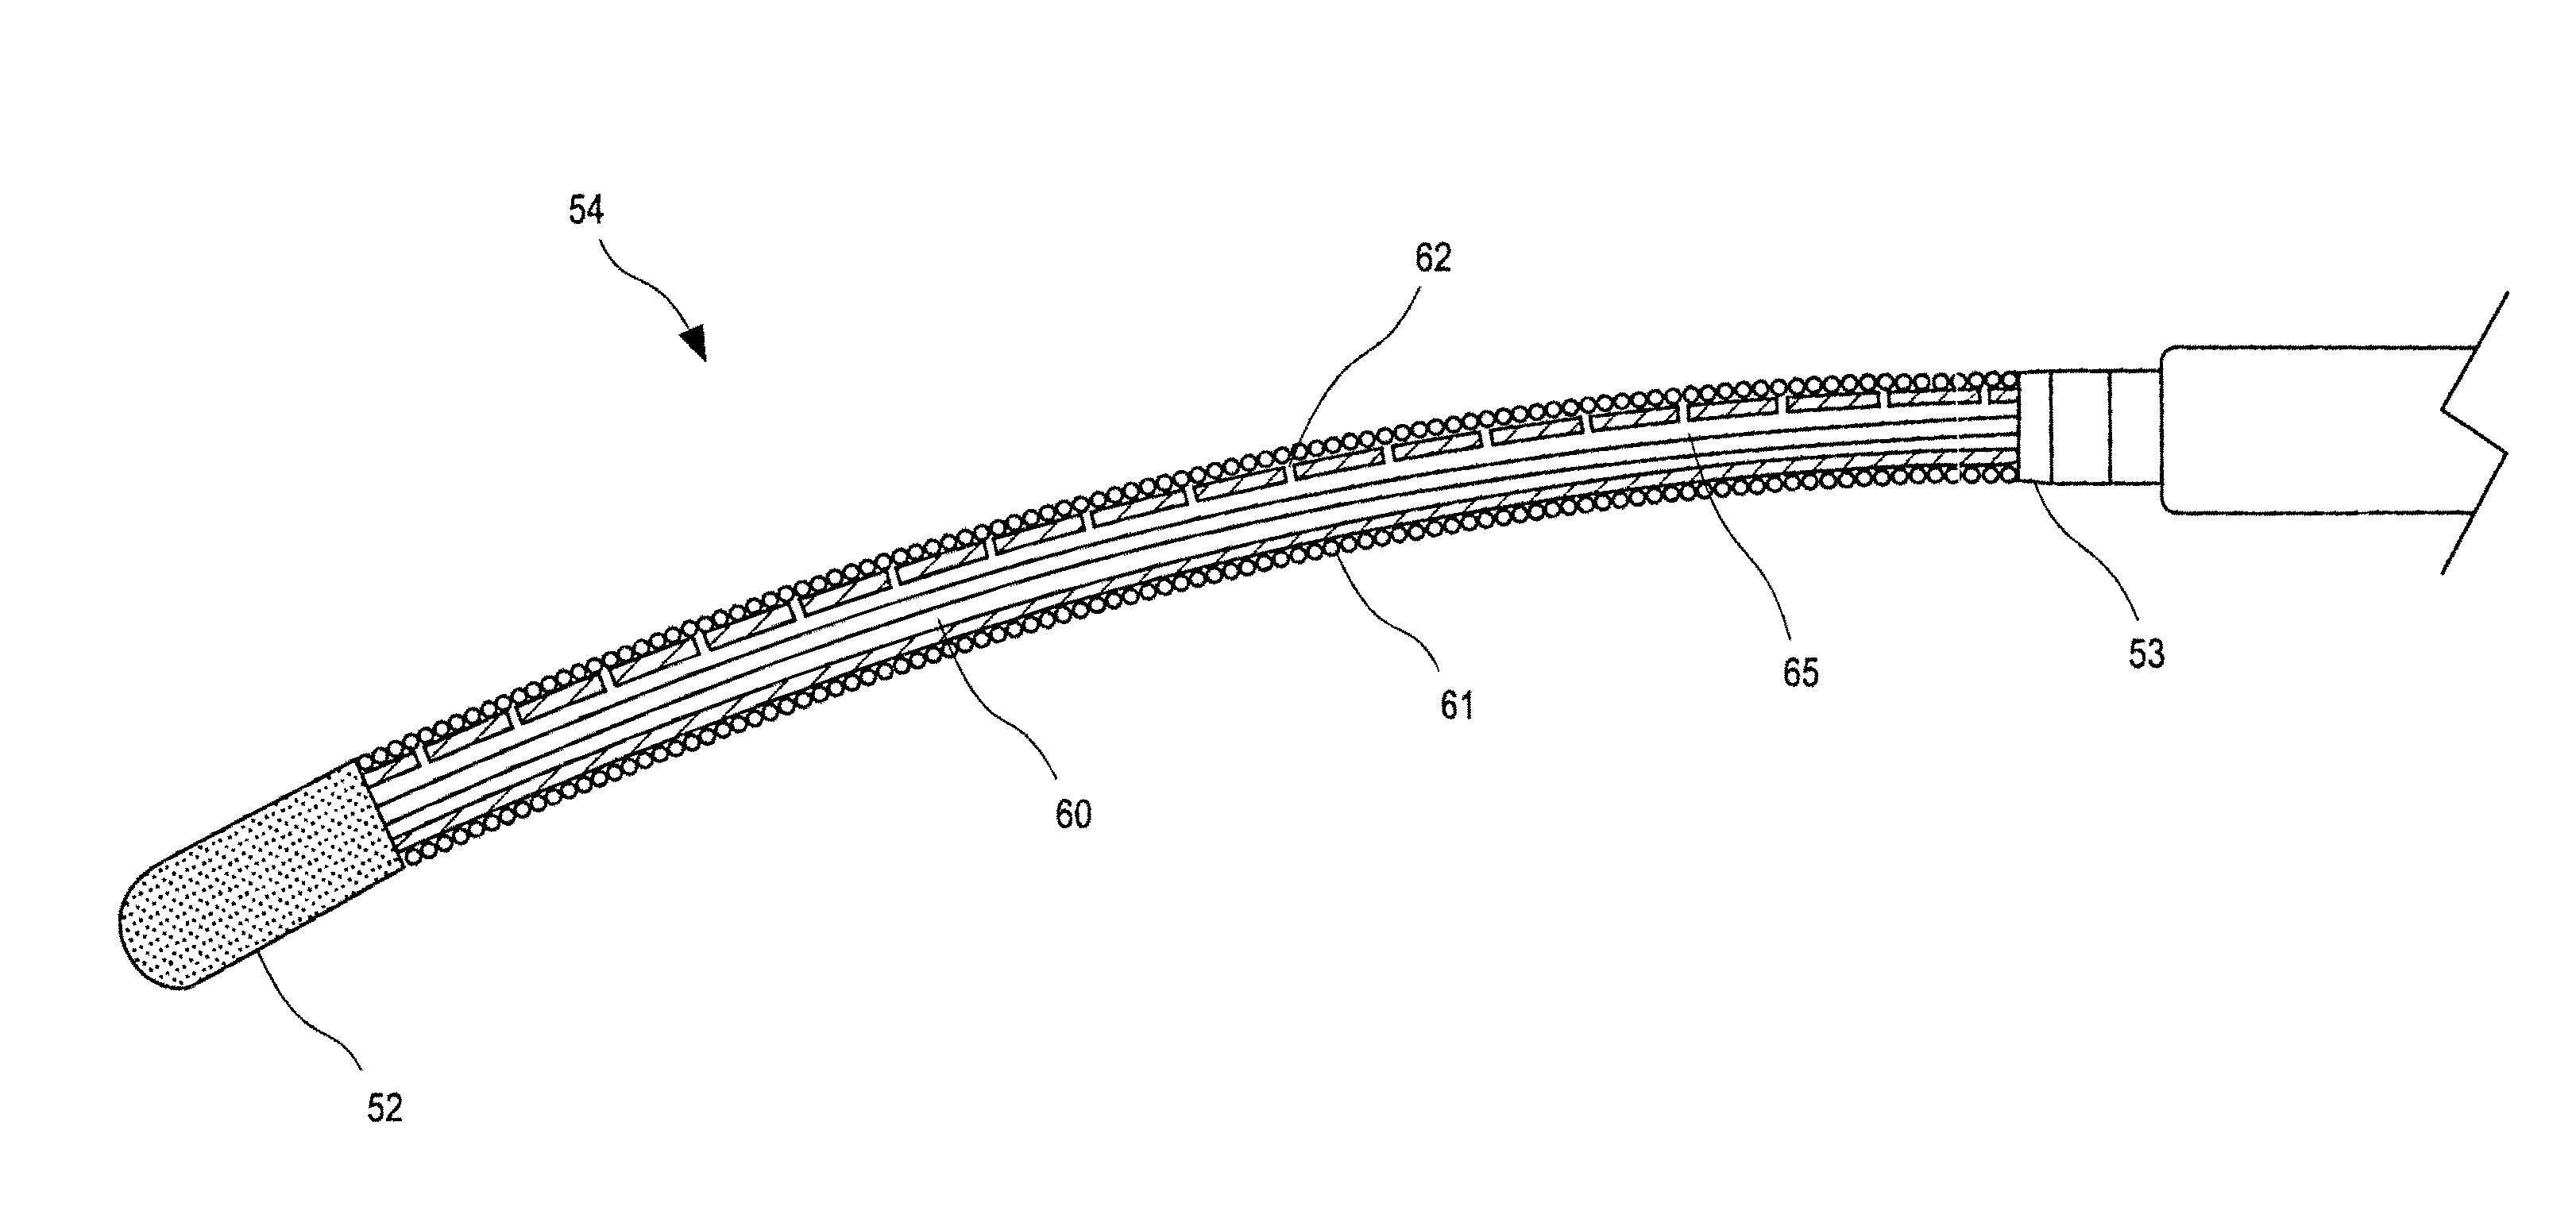 Ablation catheter with cooled linear electrode